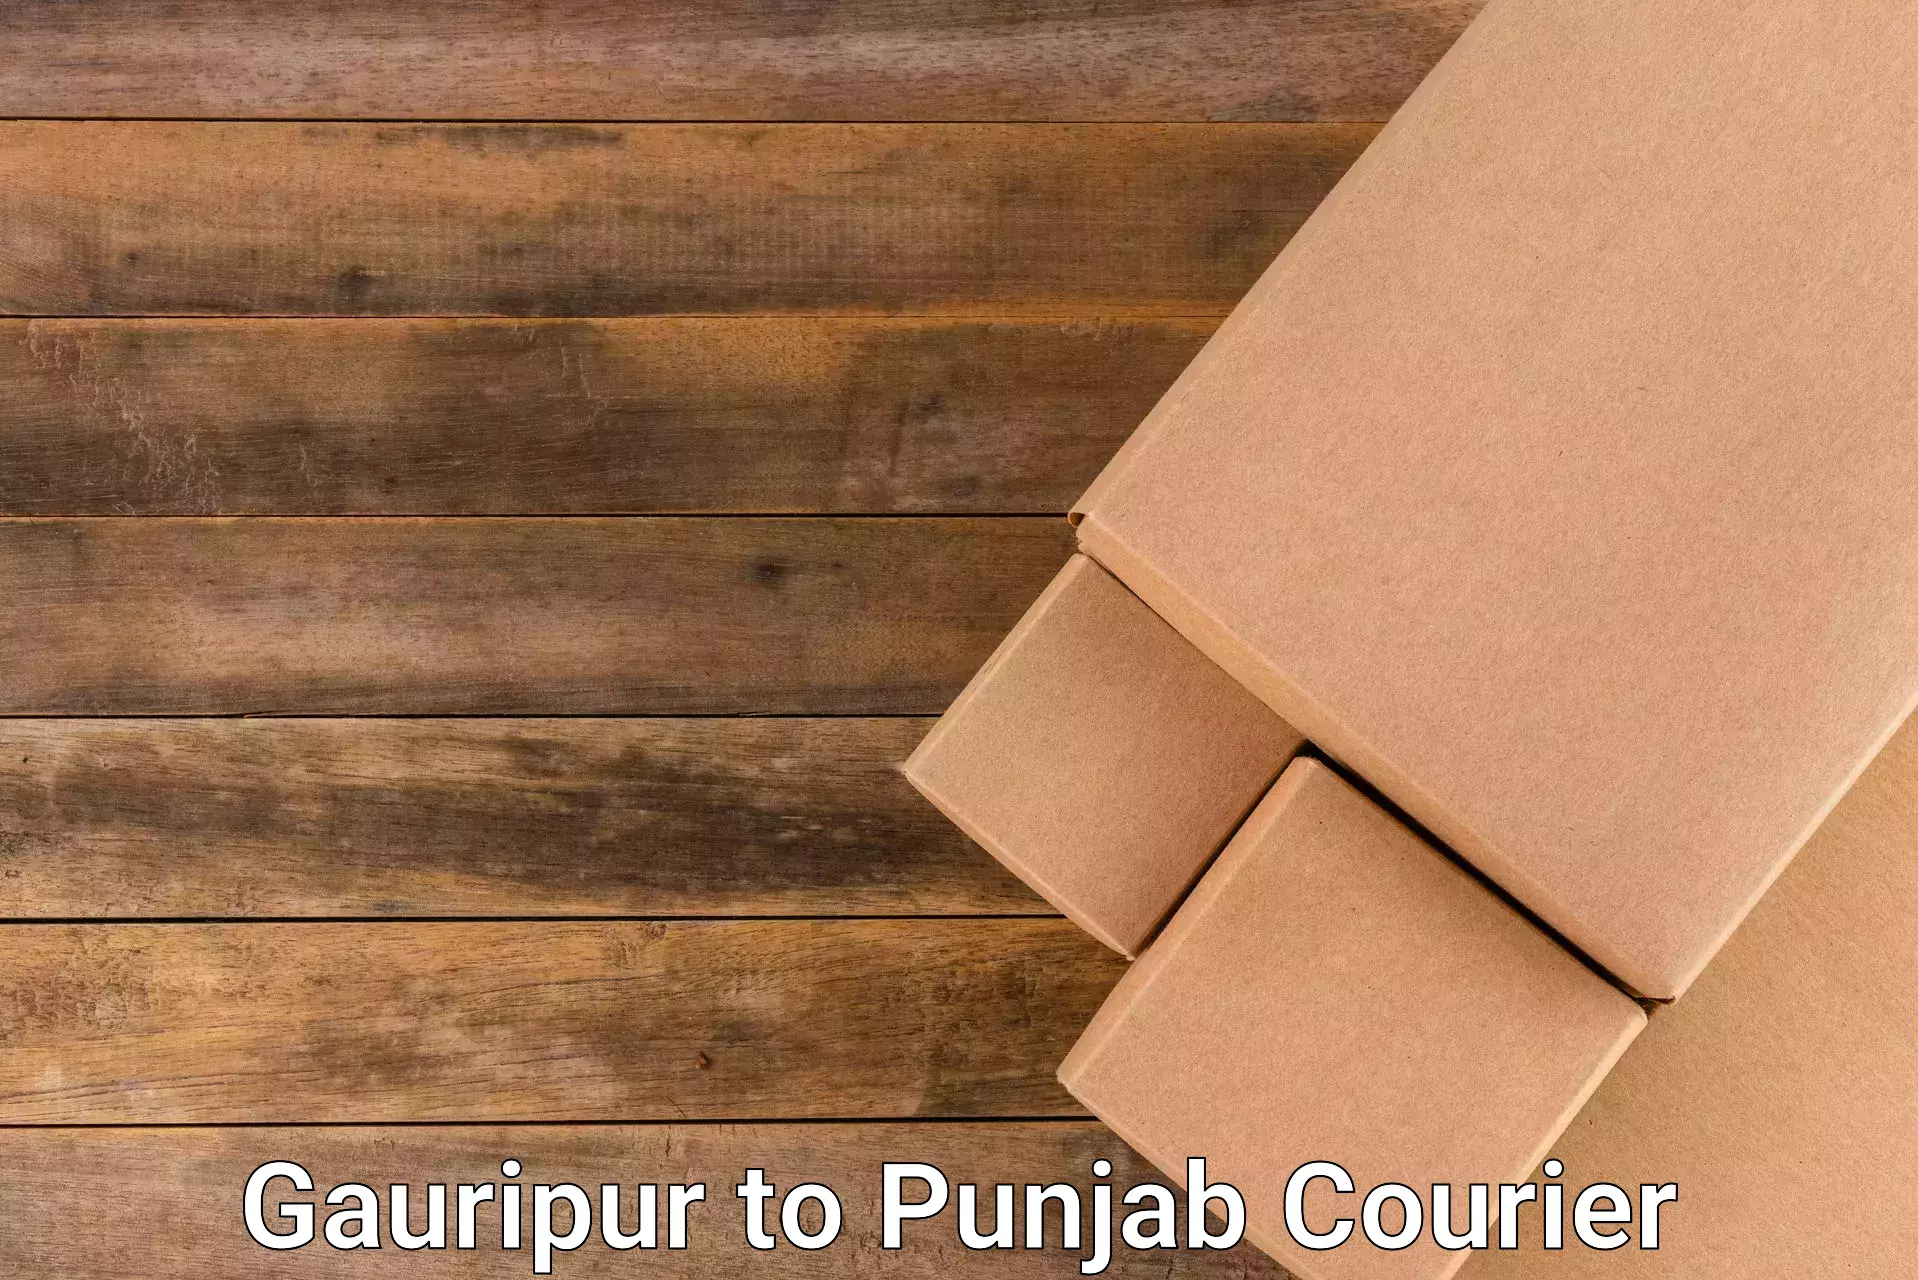 Sustainable shipping practices Gauripur to Fazilka